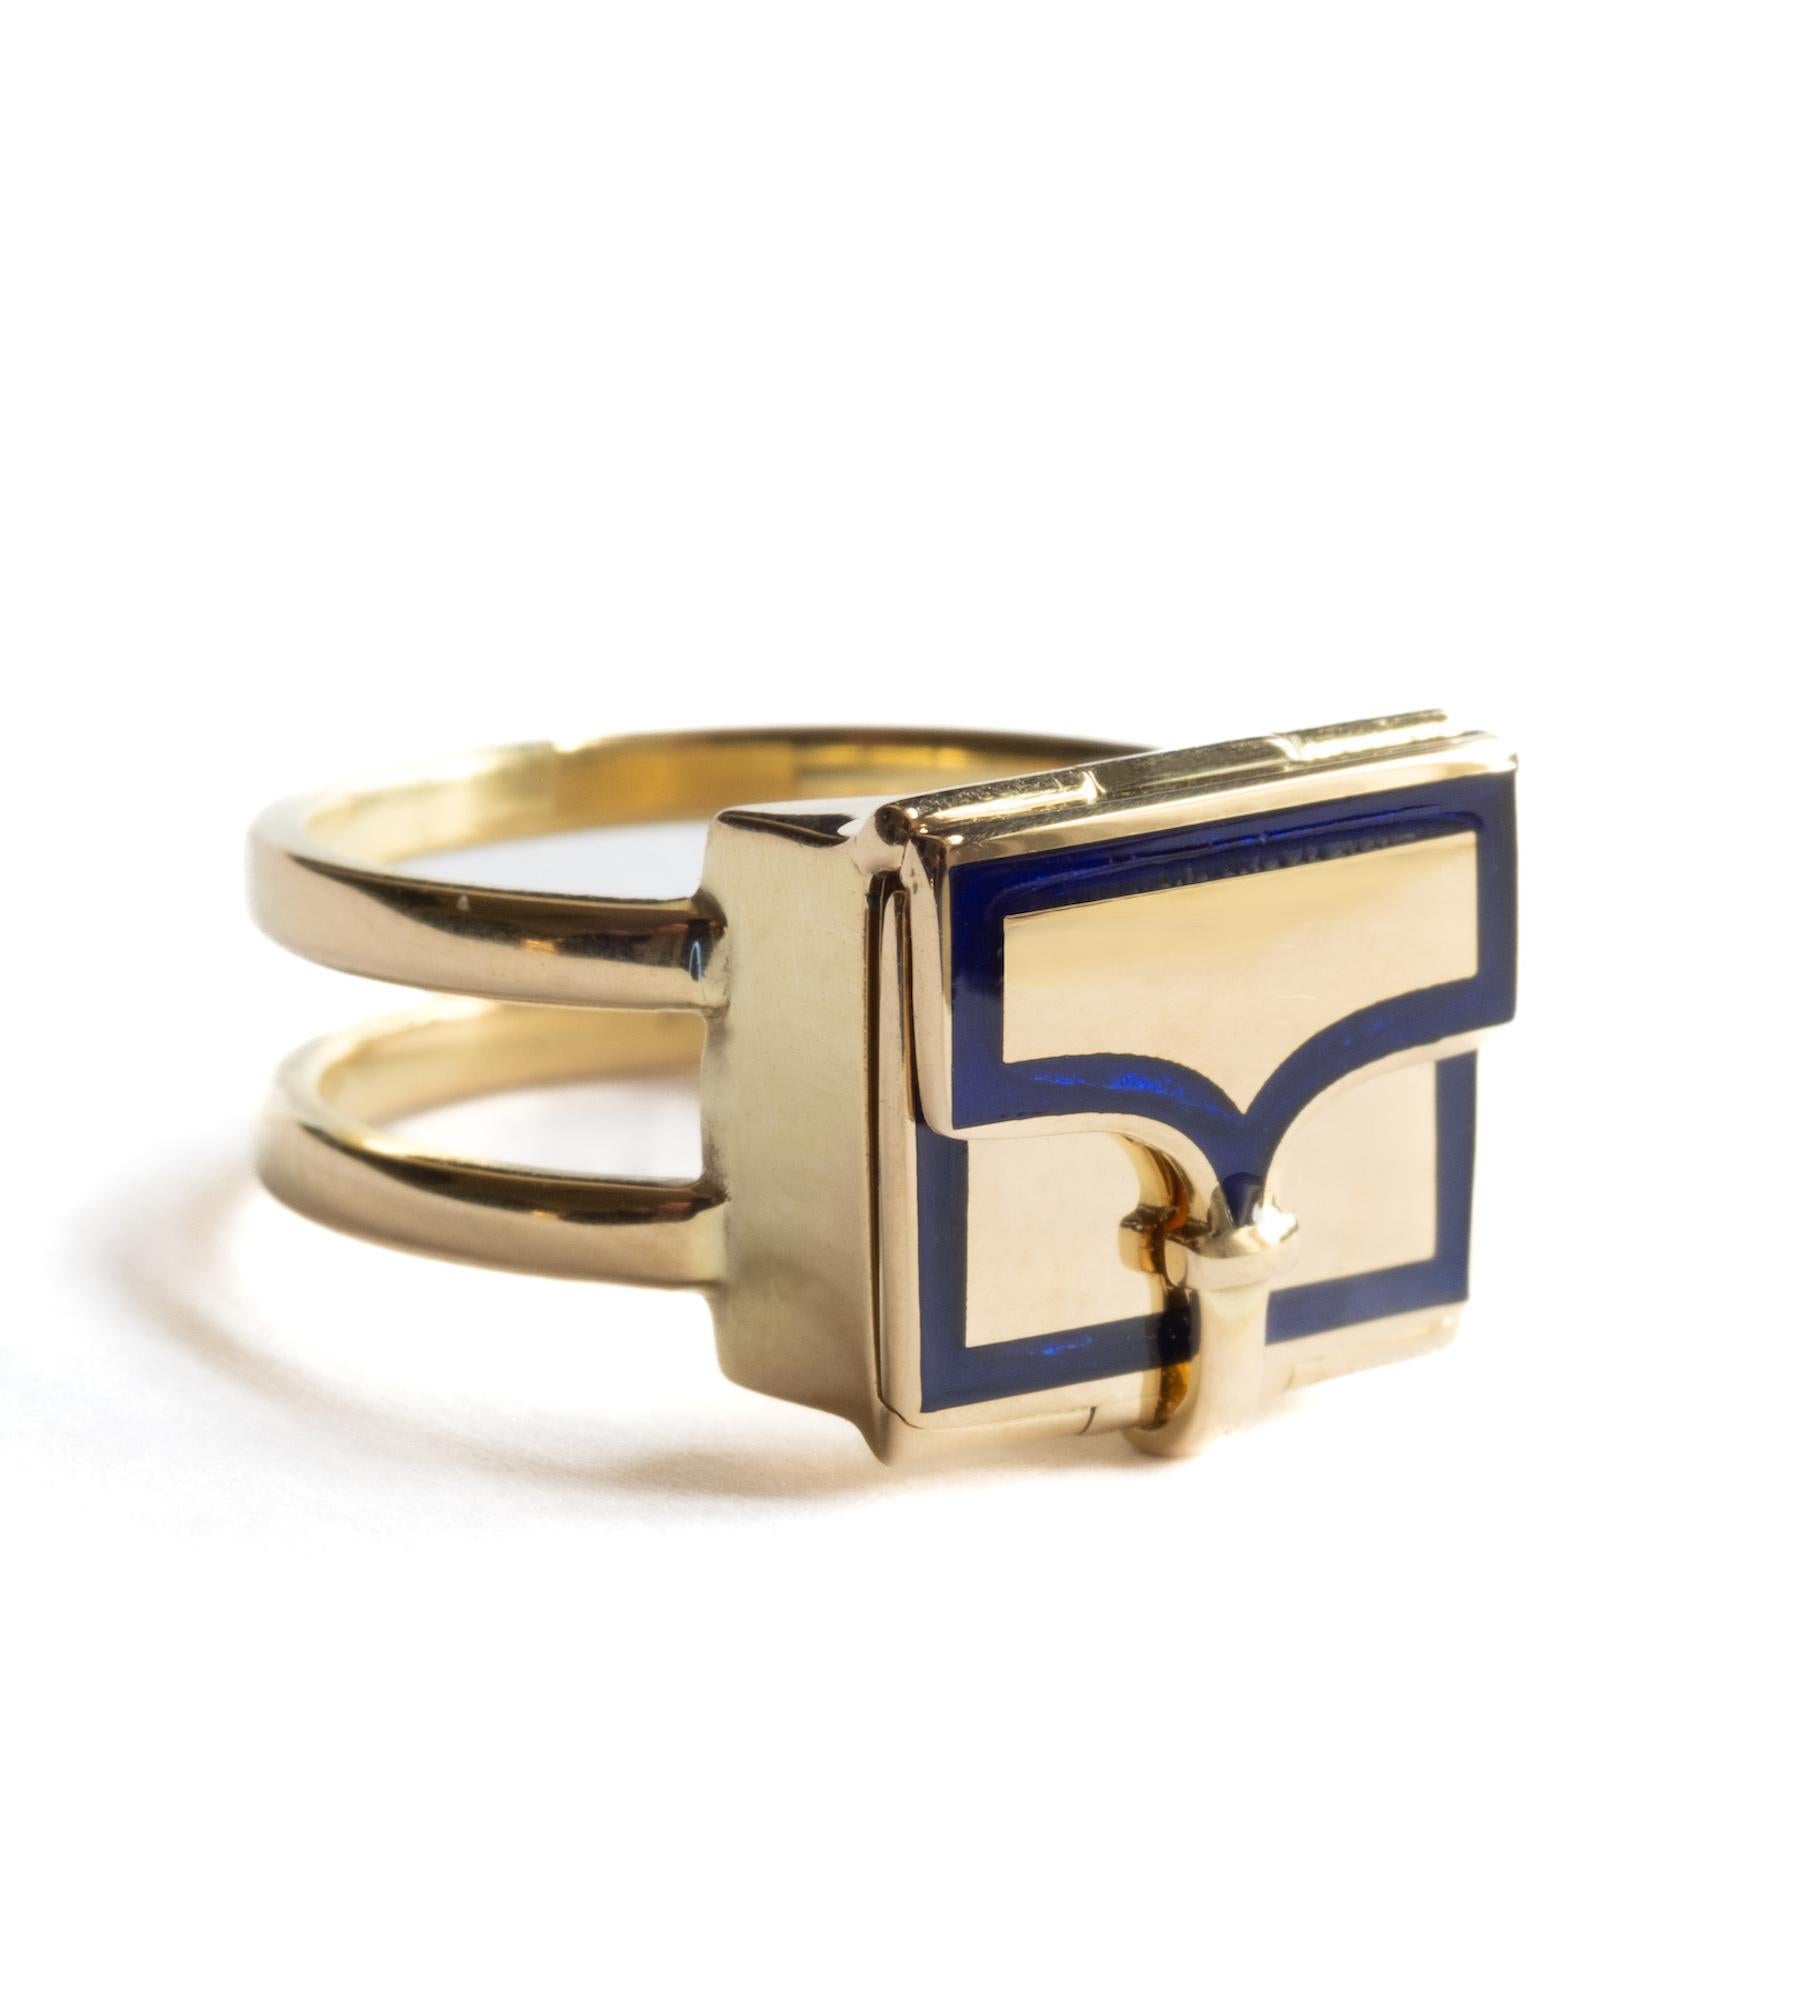 Crafted in 18ct yellow gold and vitreous enamel, the Fleur Fairfax Book Ring is inspired by a Georgian original opening booking ring circa 1830. 
The Georgians relied on motif jewels to speak volumes; the book symbolises wisdom and the power of